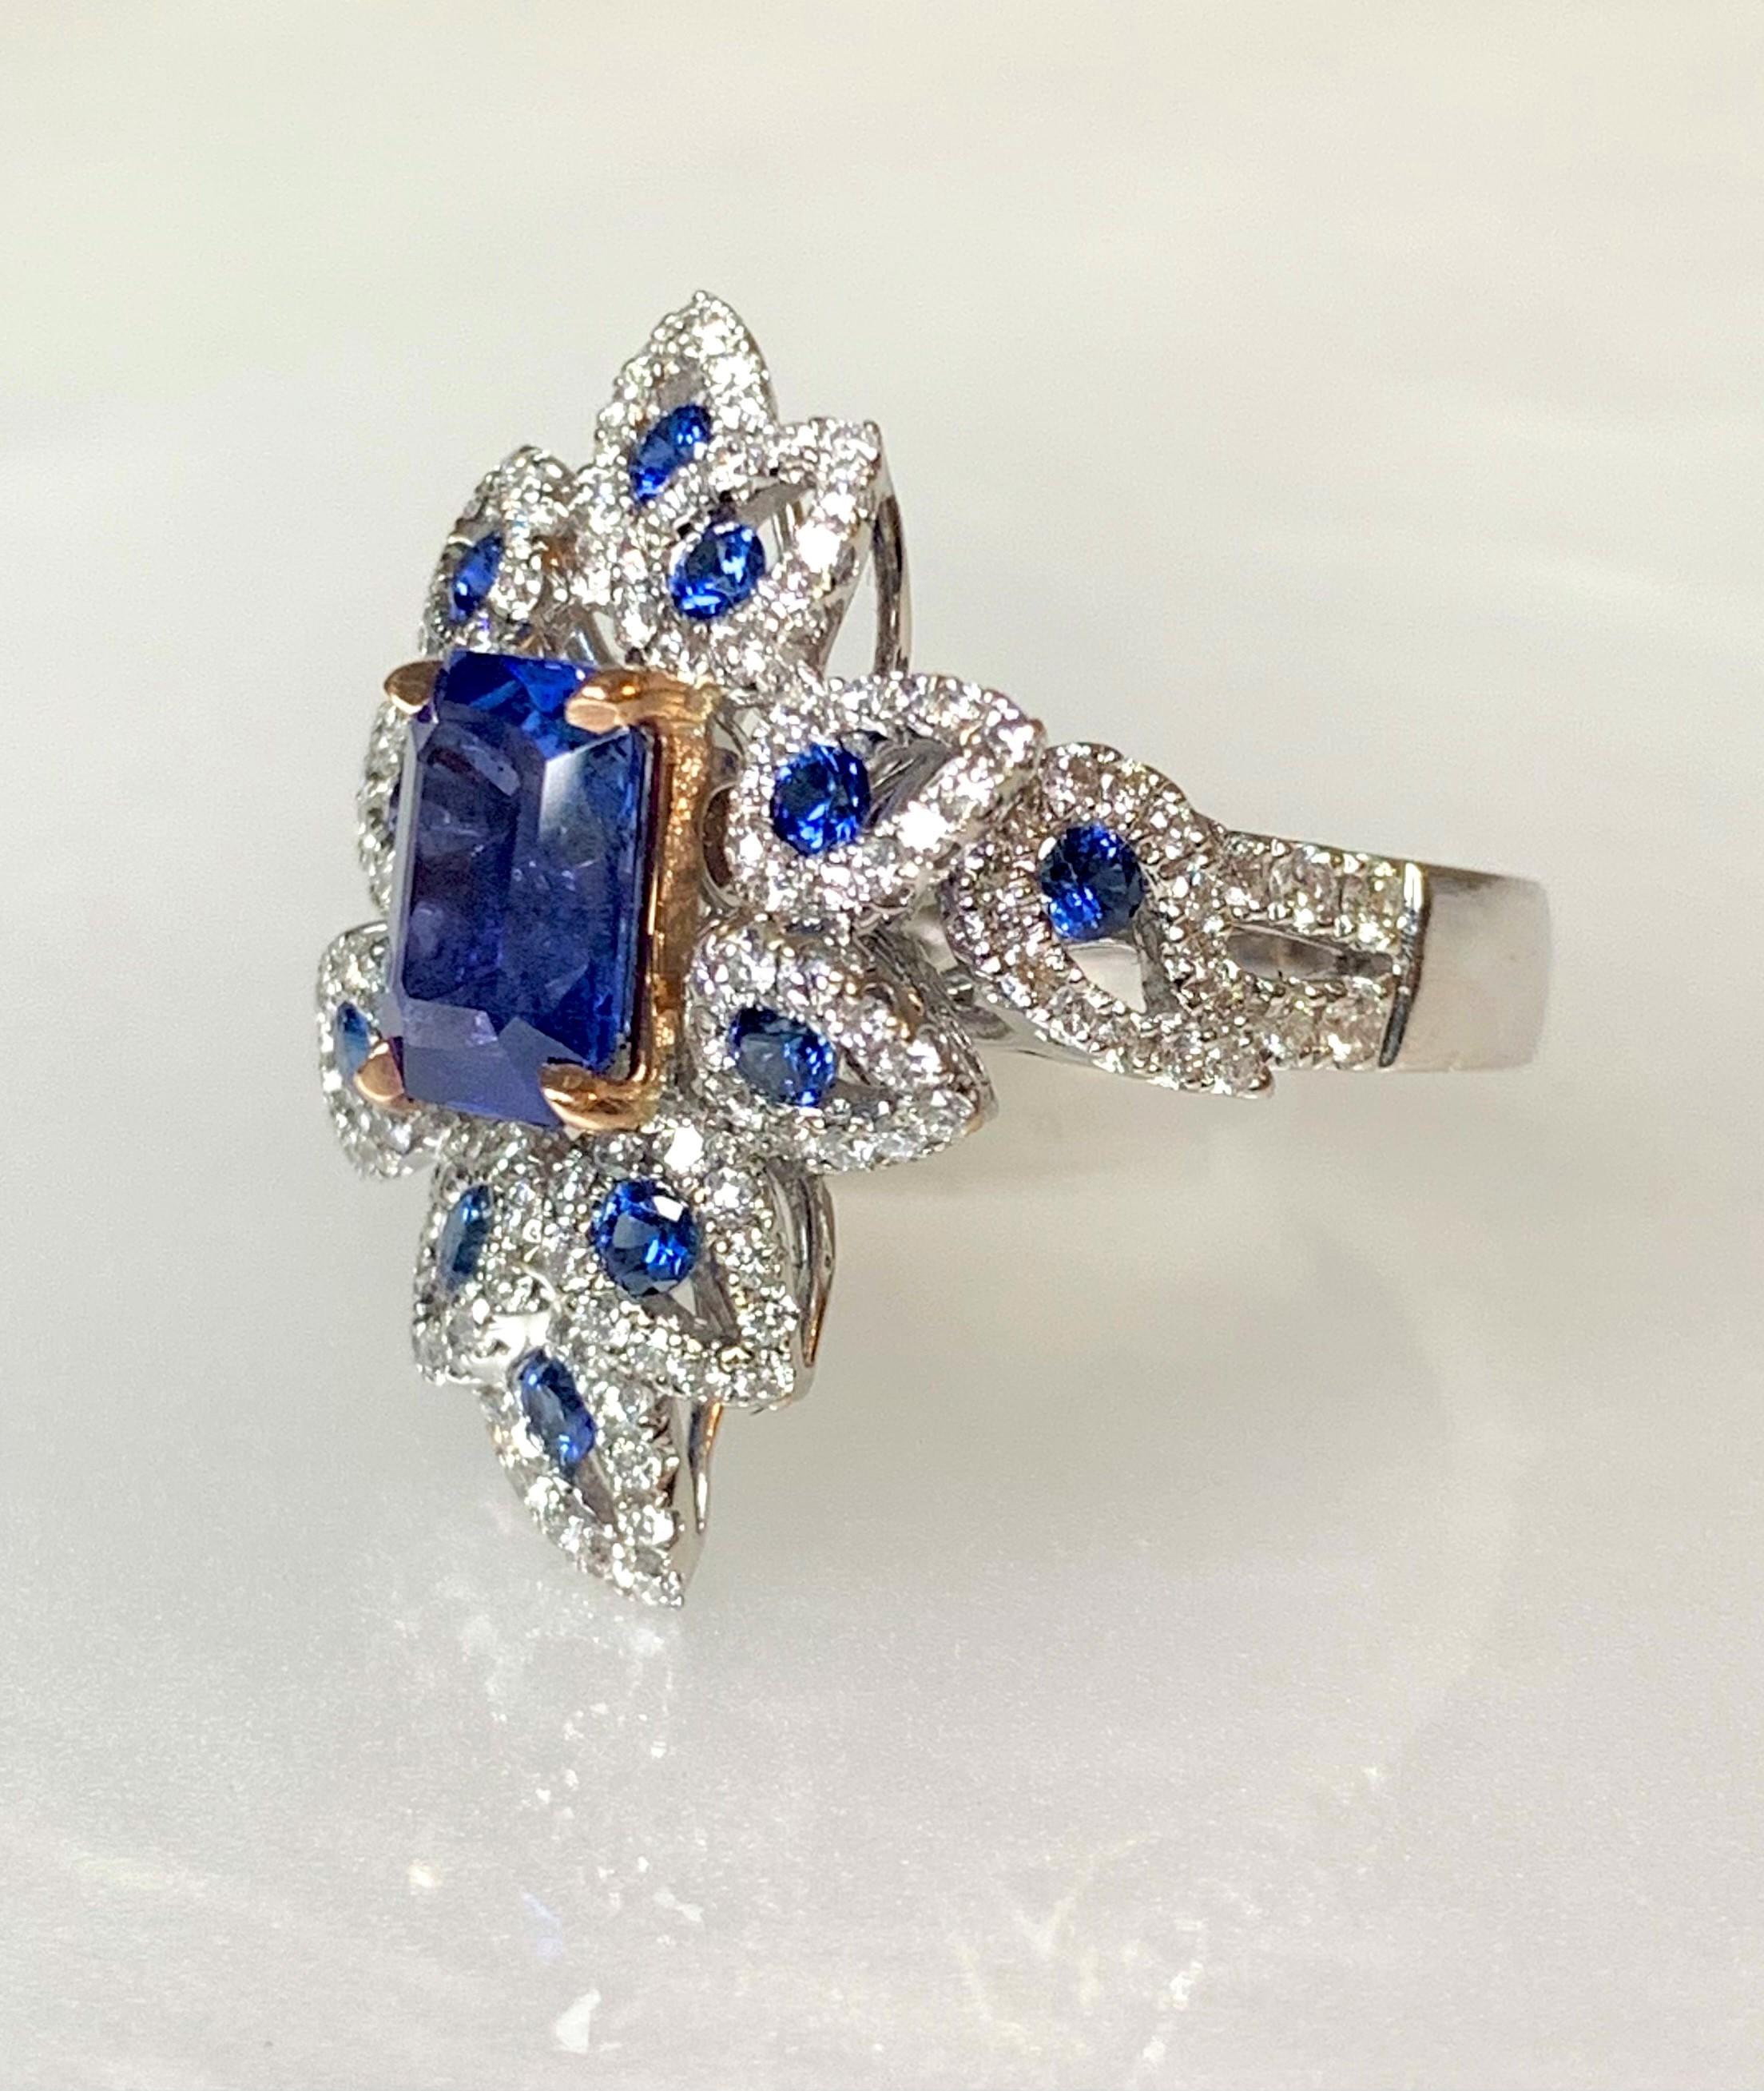 An exceptional piece with meticulous detailing to add to your fine jewelry collection. Here is an 18k white gold one of a kind richly saturated blue sapphire ring featuring a 3.17 carat emerald- cut center stone set in rose gold prongs, surrounded